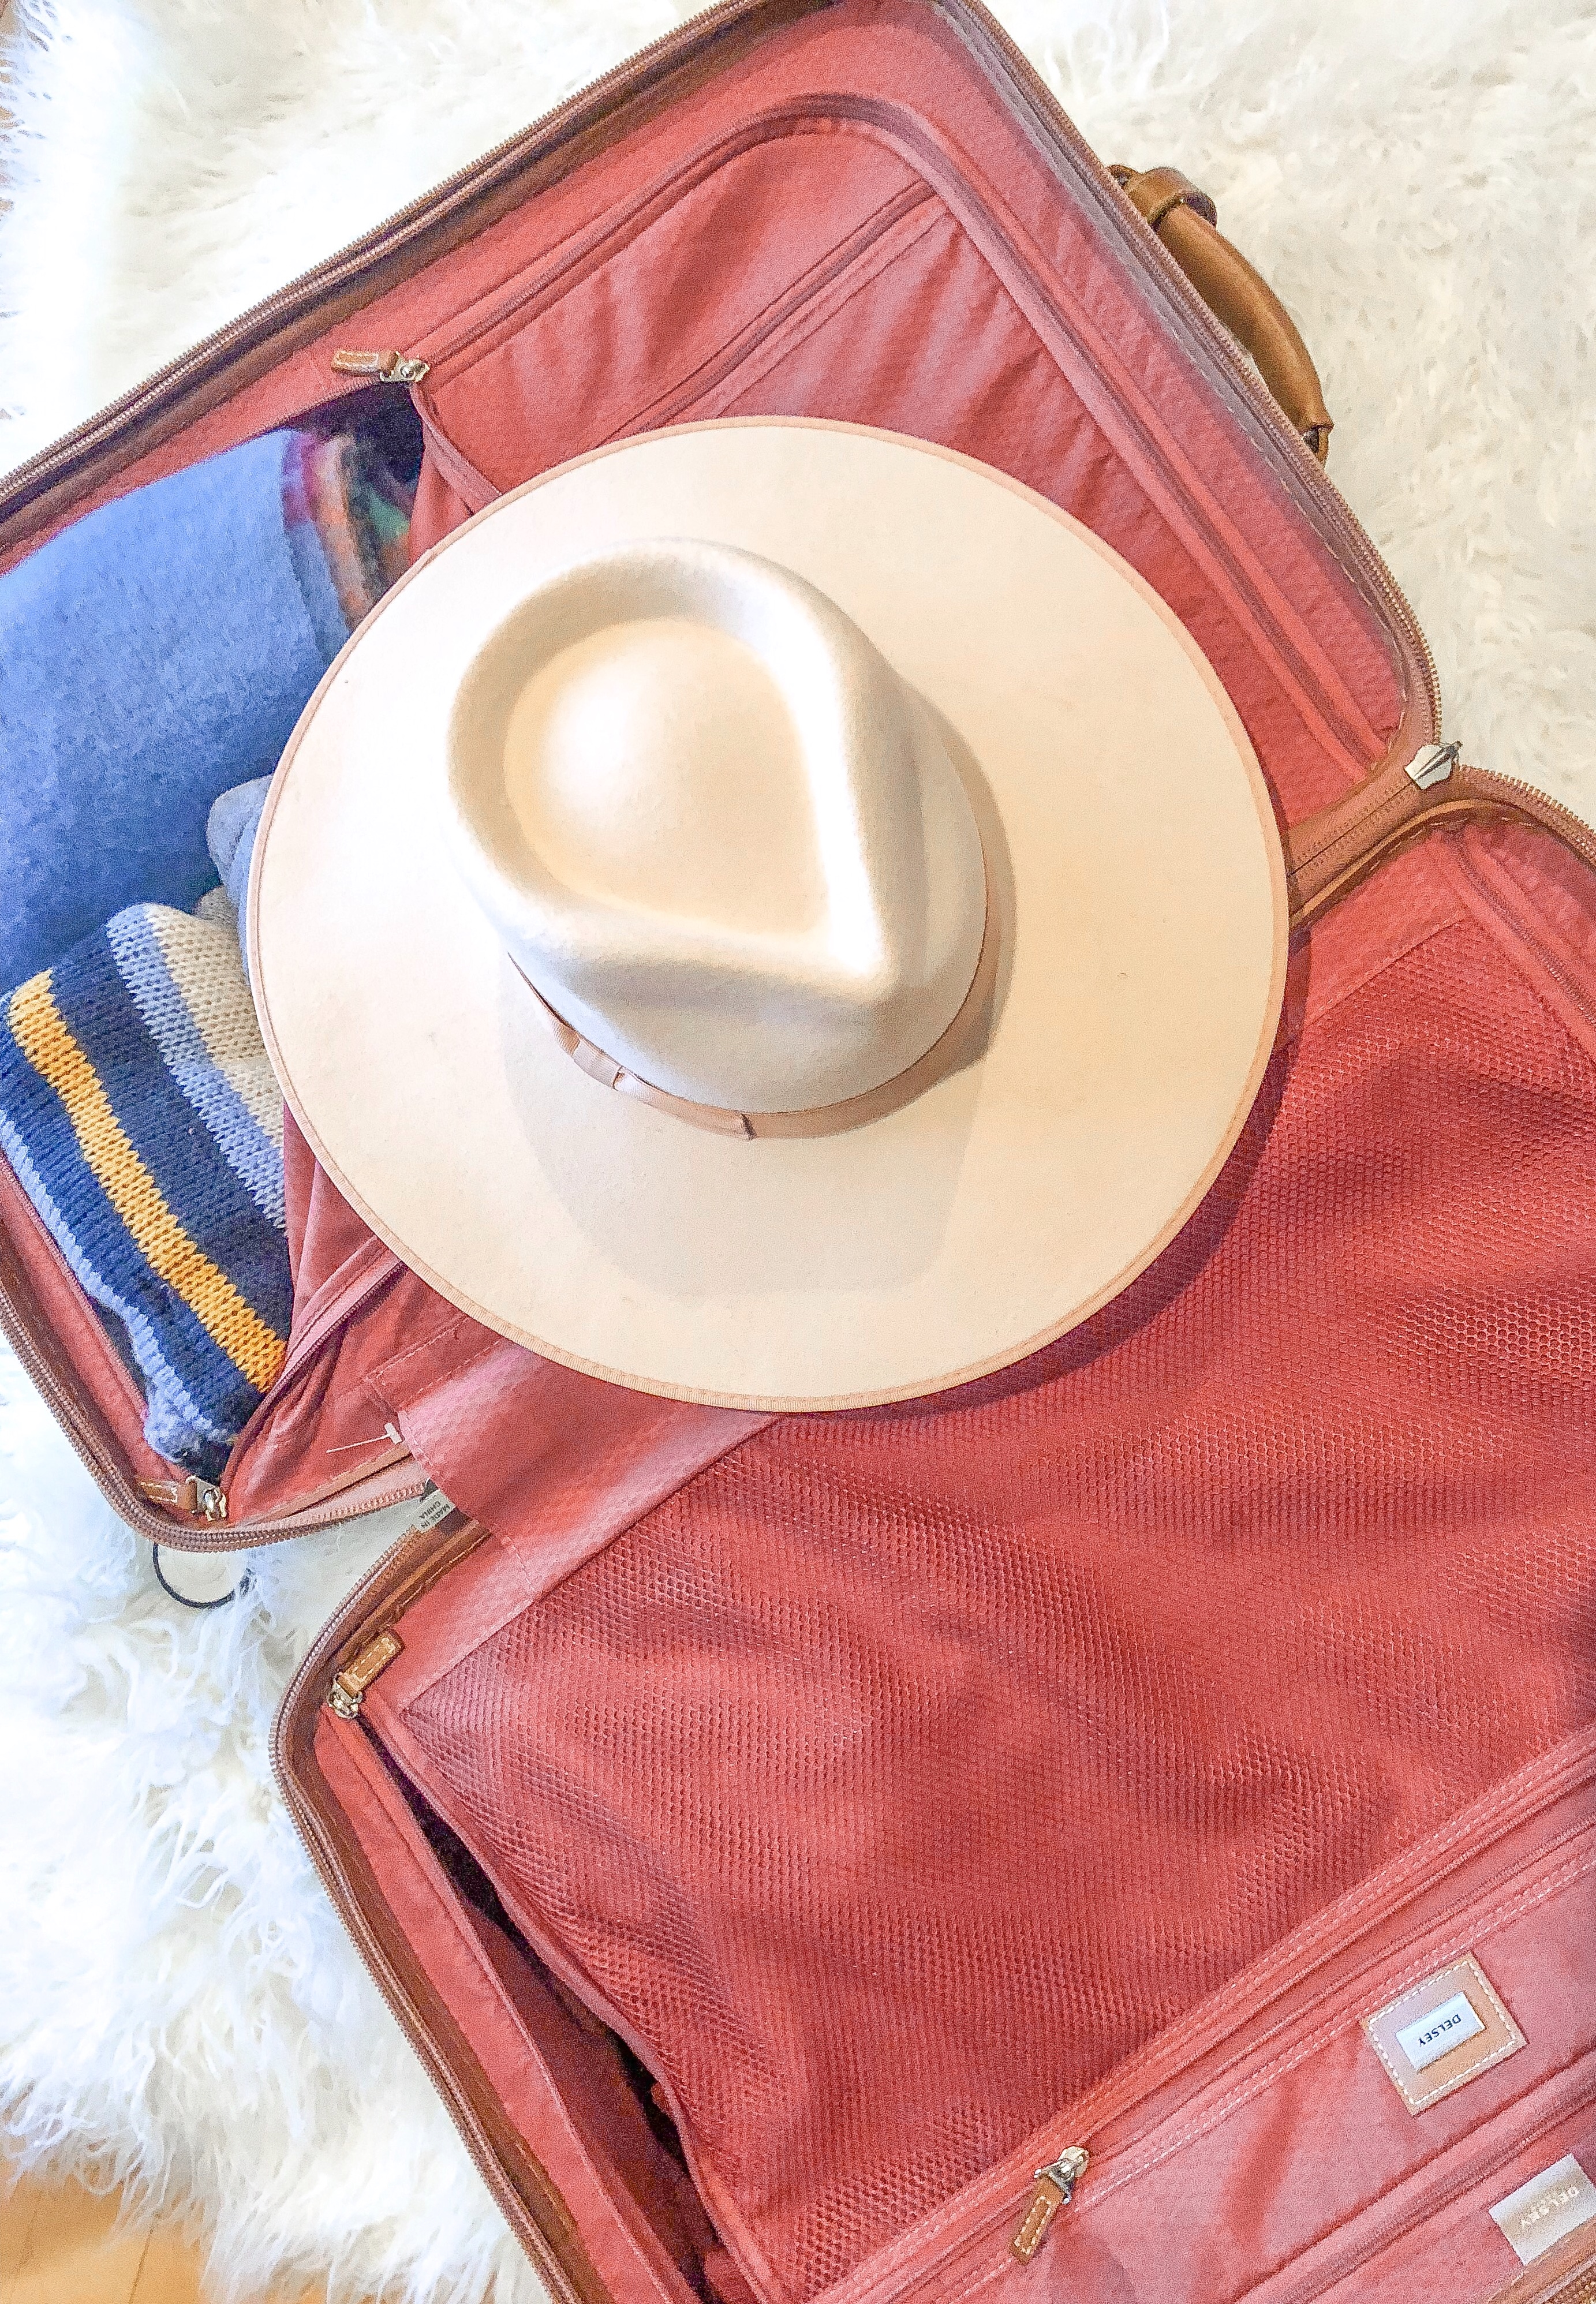 How to Pack a Hat Box & Tips for Traveling with Large Hats - Annie